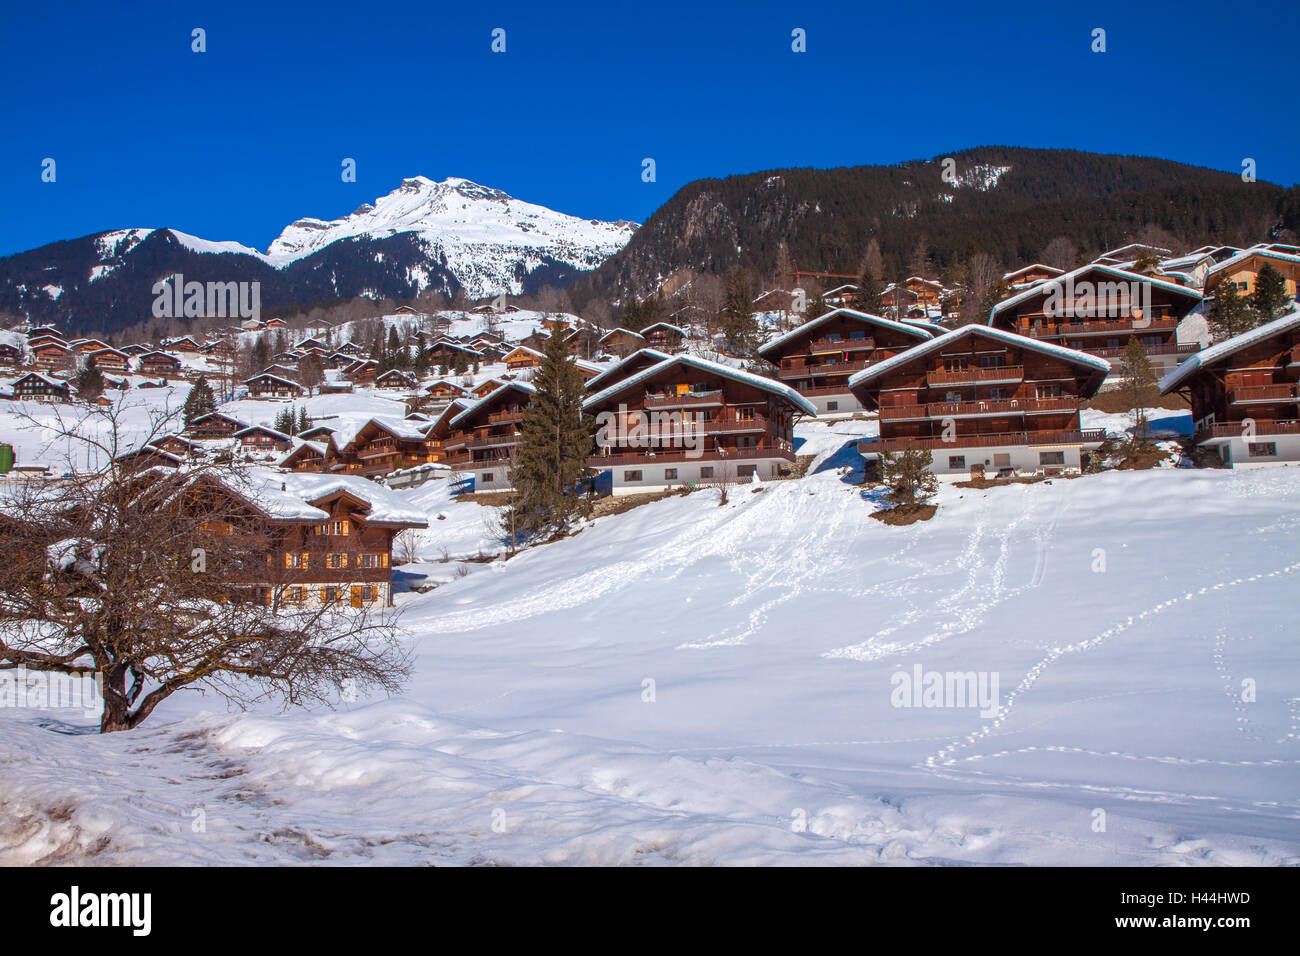 Wooden chalets covered by snow in Swiss Alps, Wengen, Switzerland Stock Photo